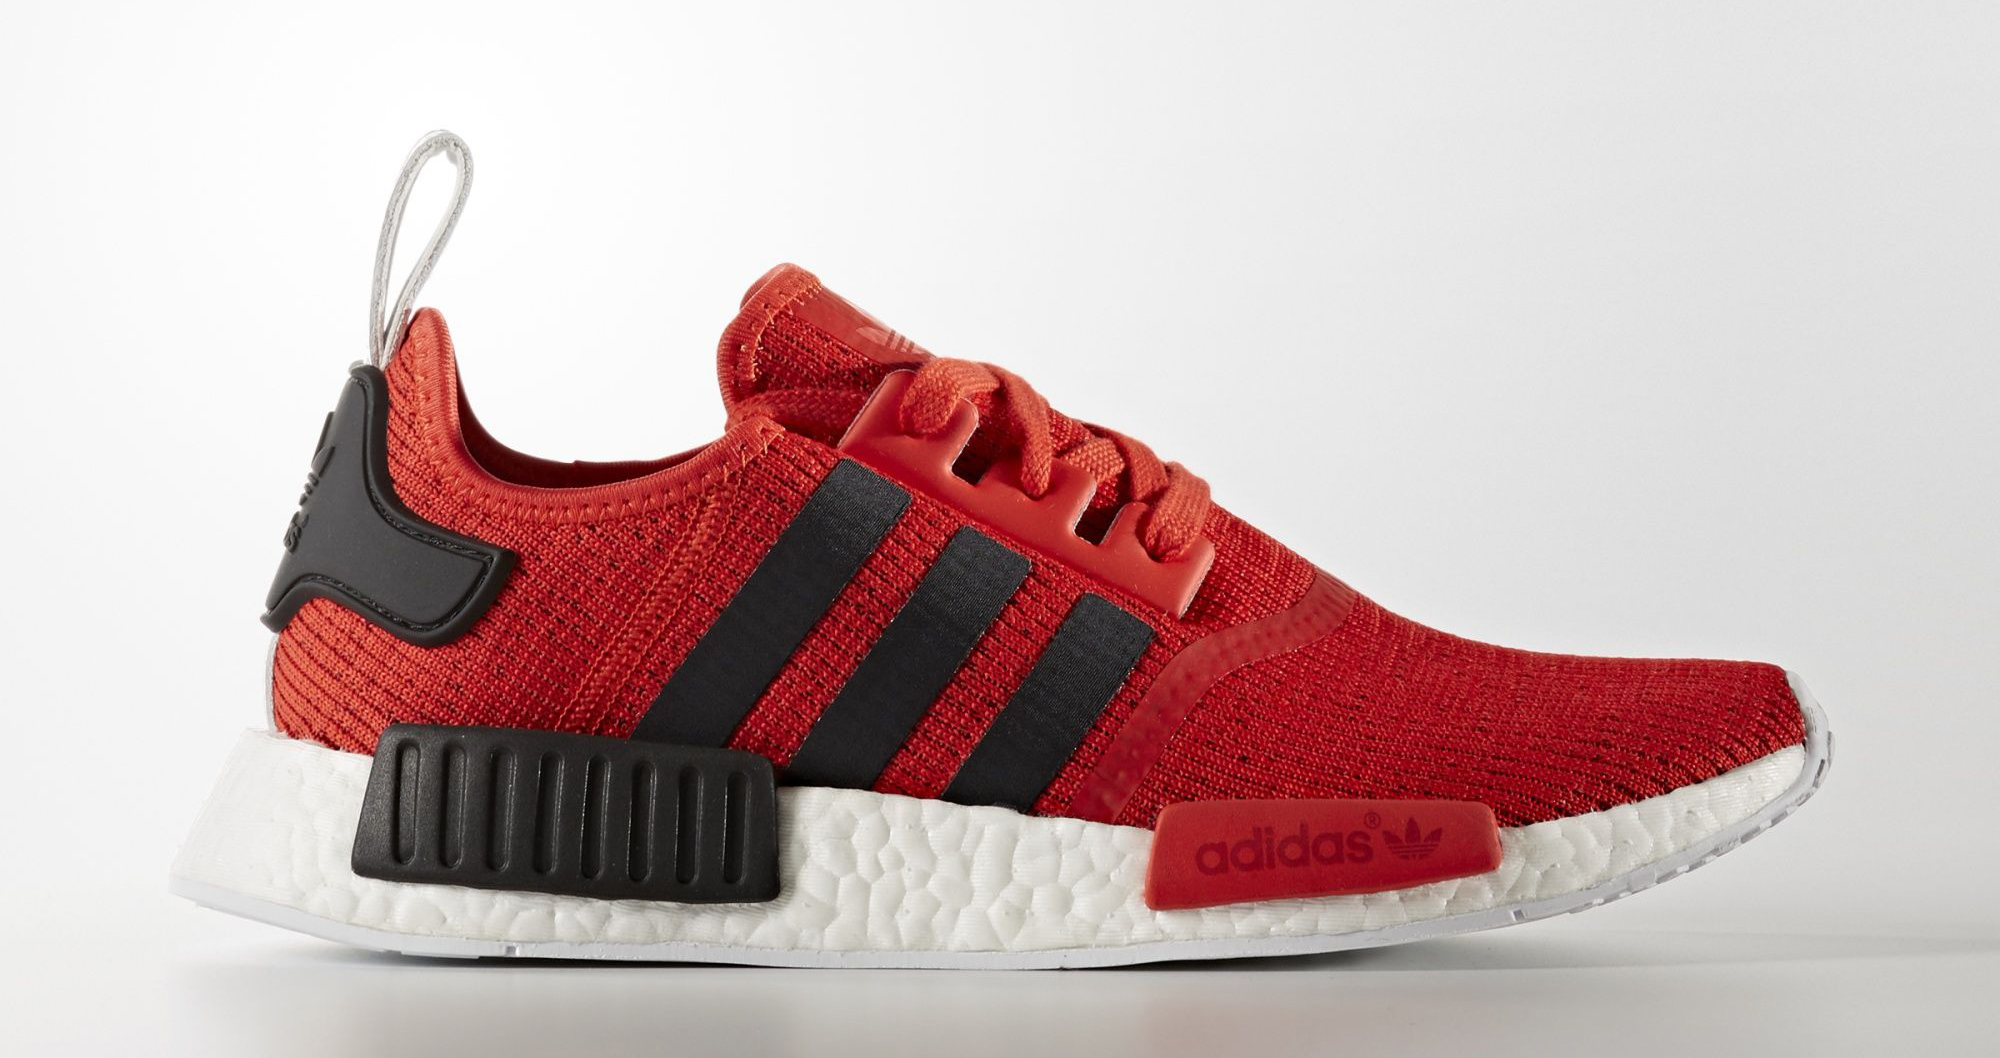 adidas-nmd_r1-core-red-black-1